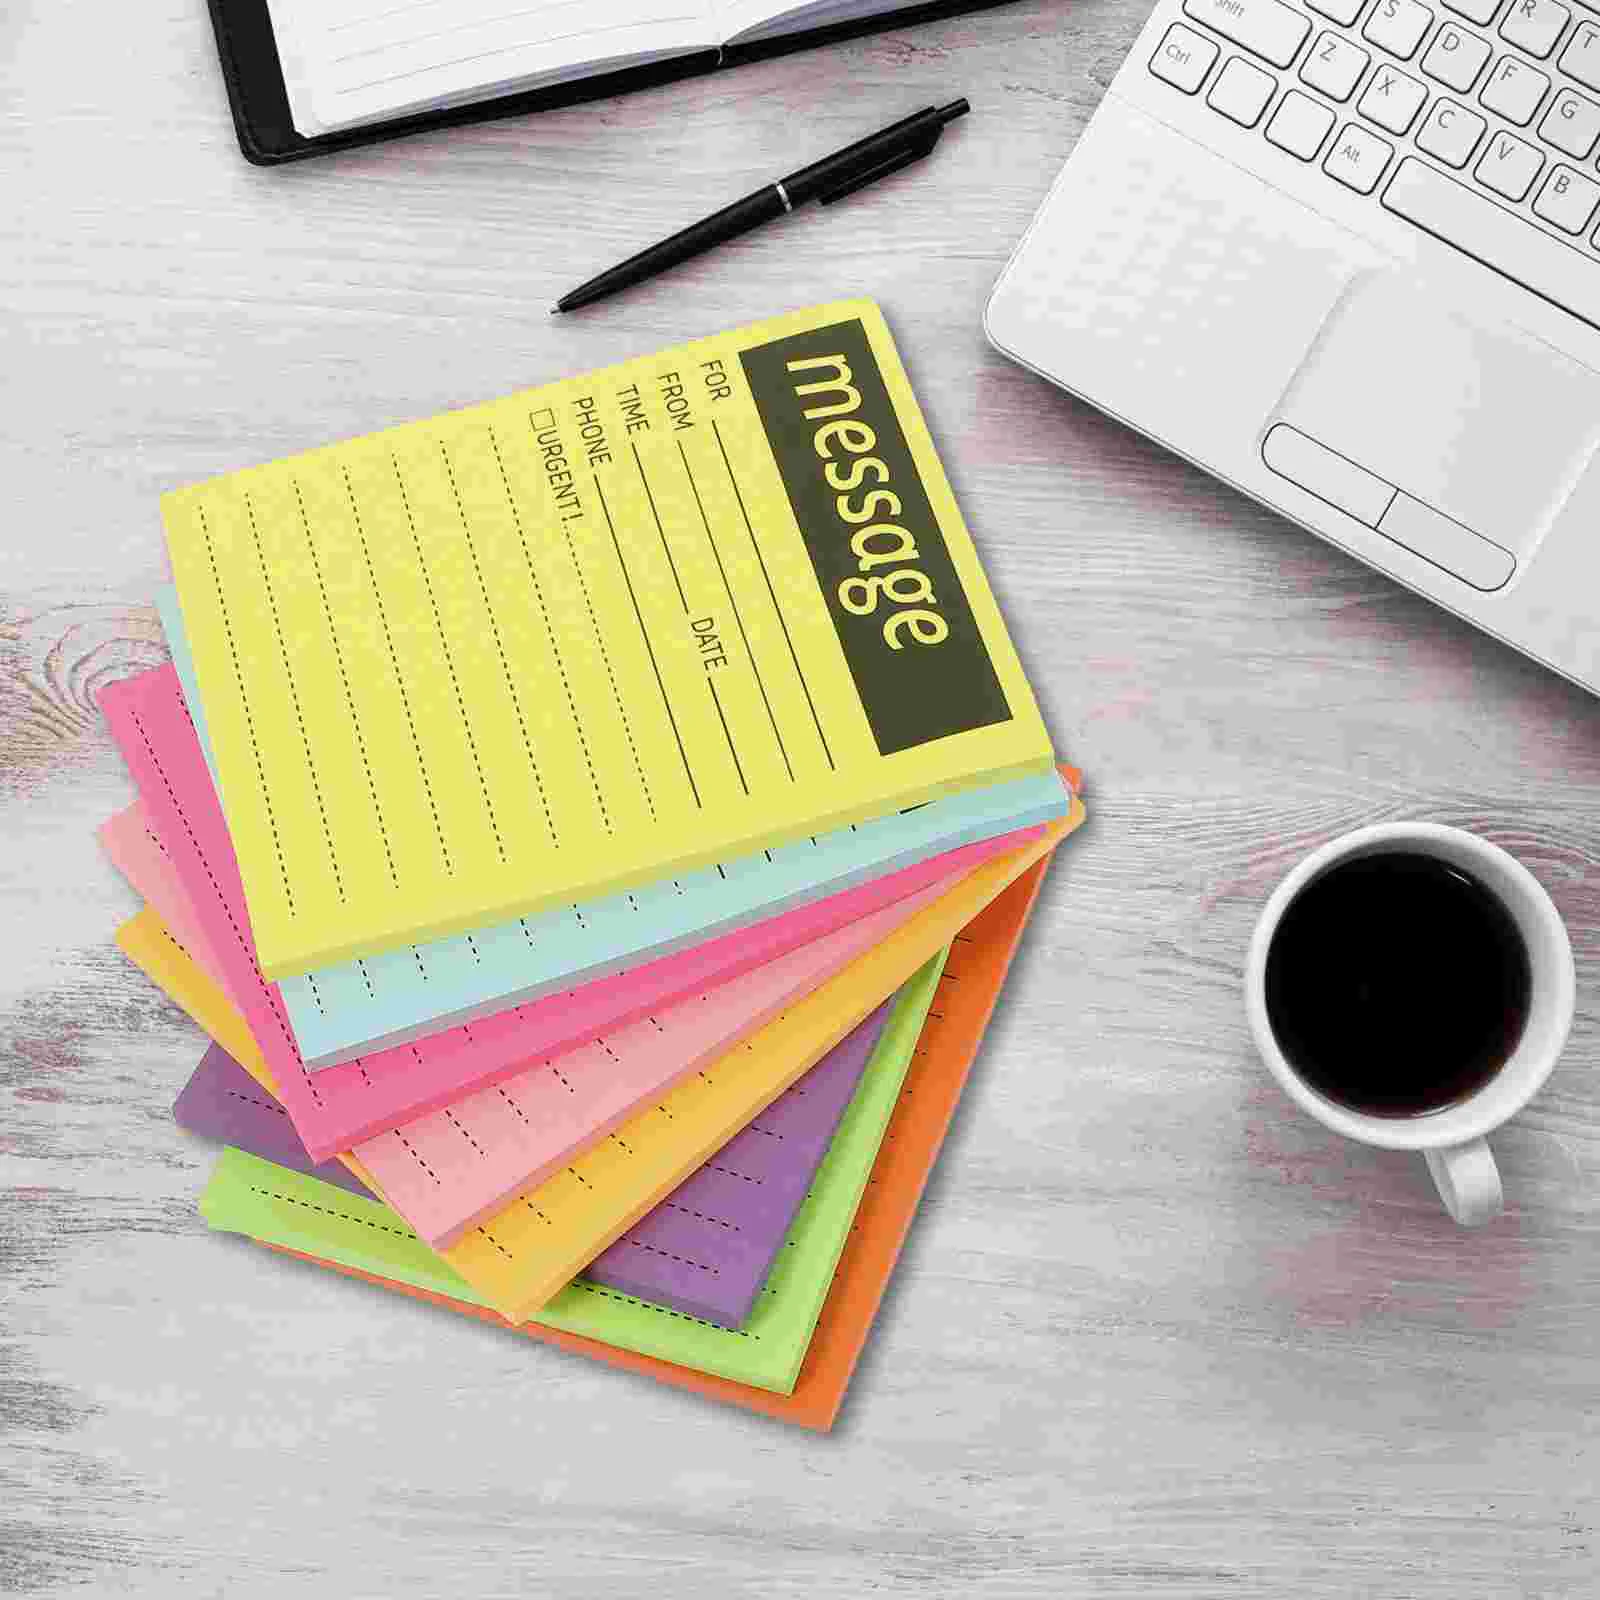 

9 Books Fluorescent Sticky Notes Memo Stickers Office Phone Message Board Multi-function Pads Daily Use Paper Coloured